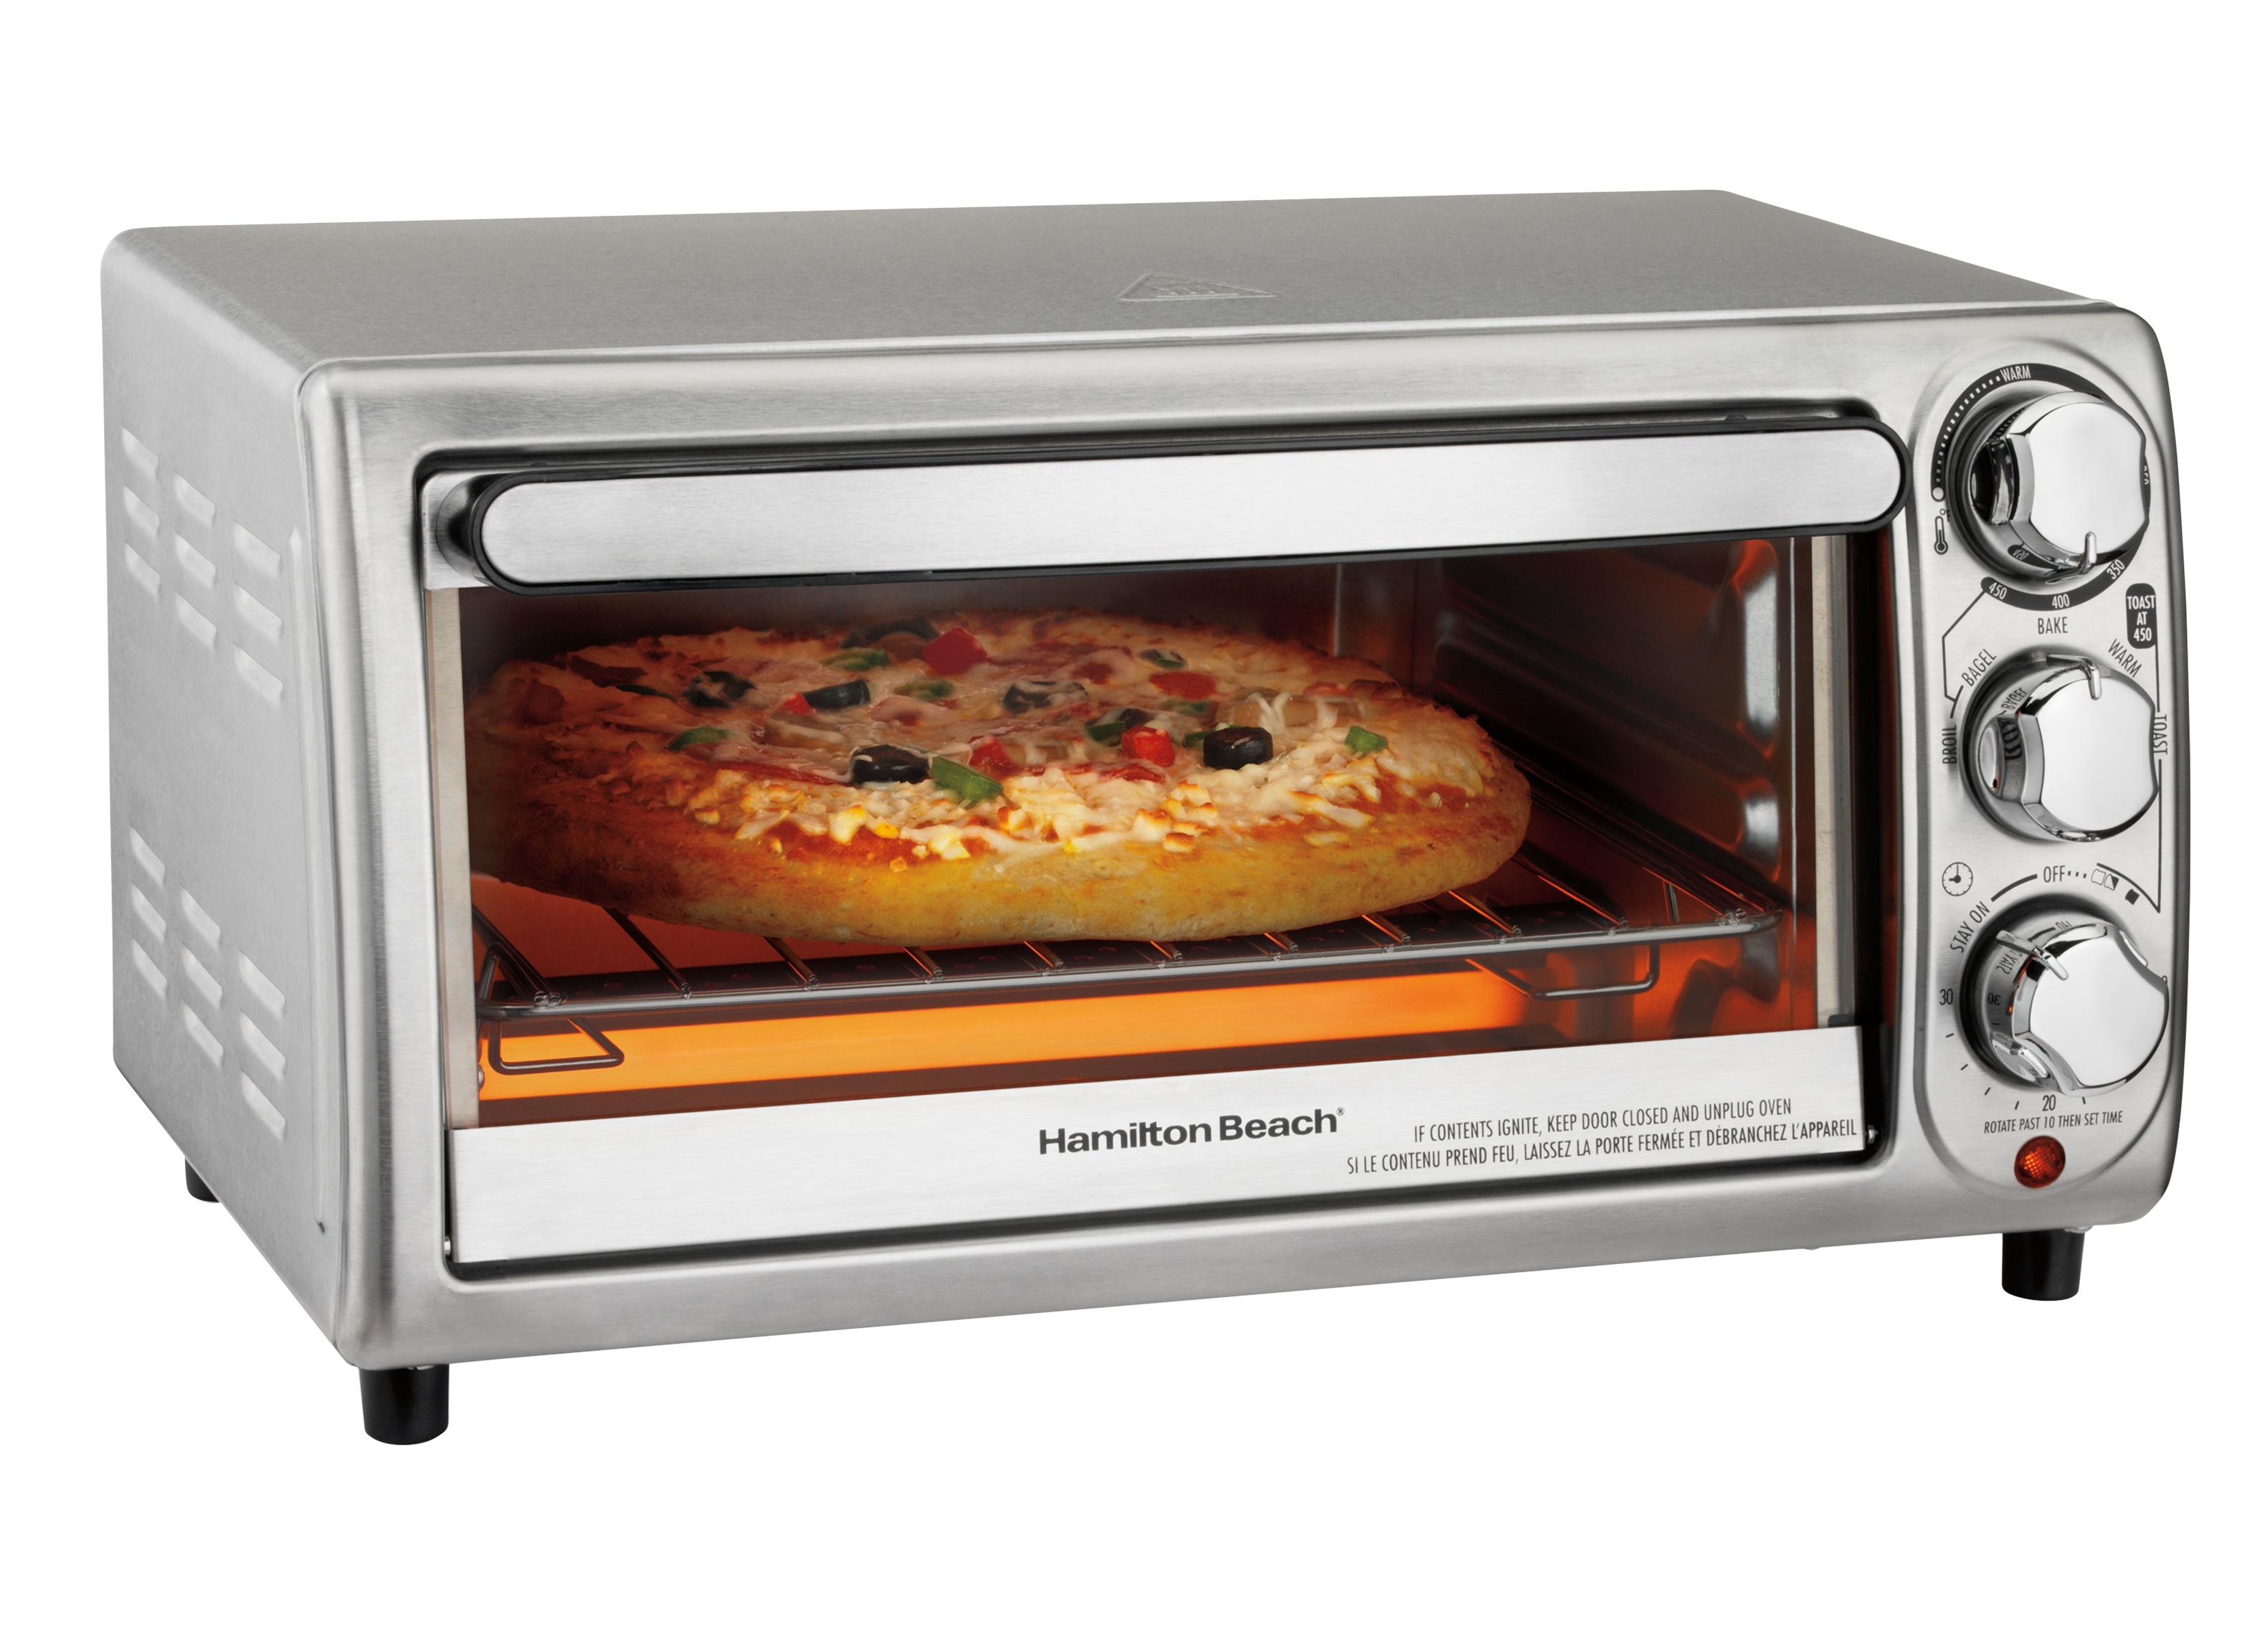 https://crdms.images.consumerreports.org/prod/products/cr/models/399811-toaster-ovens-hamilton-beach-silver-31143-10008733.png